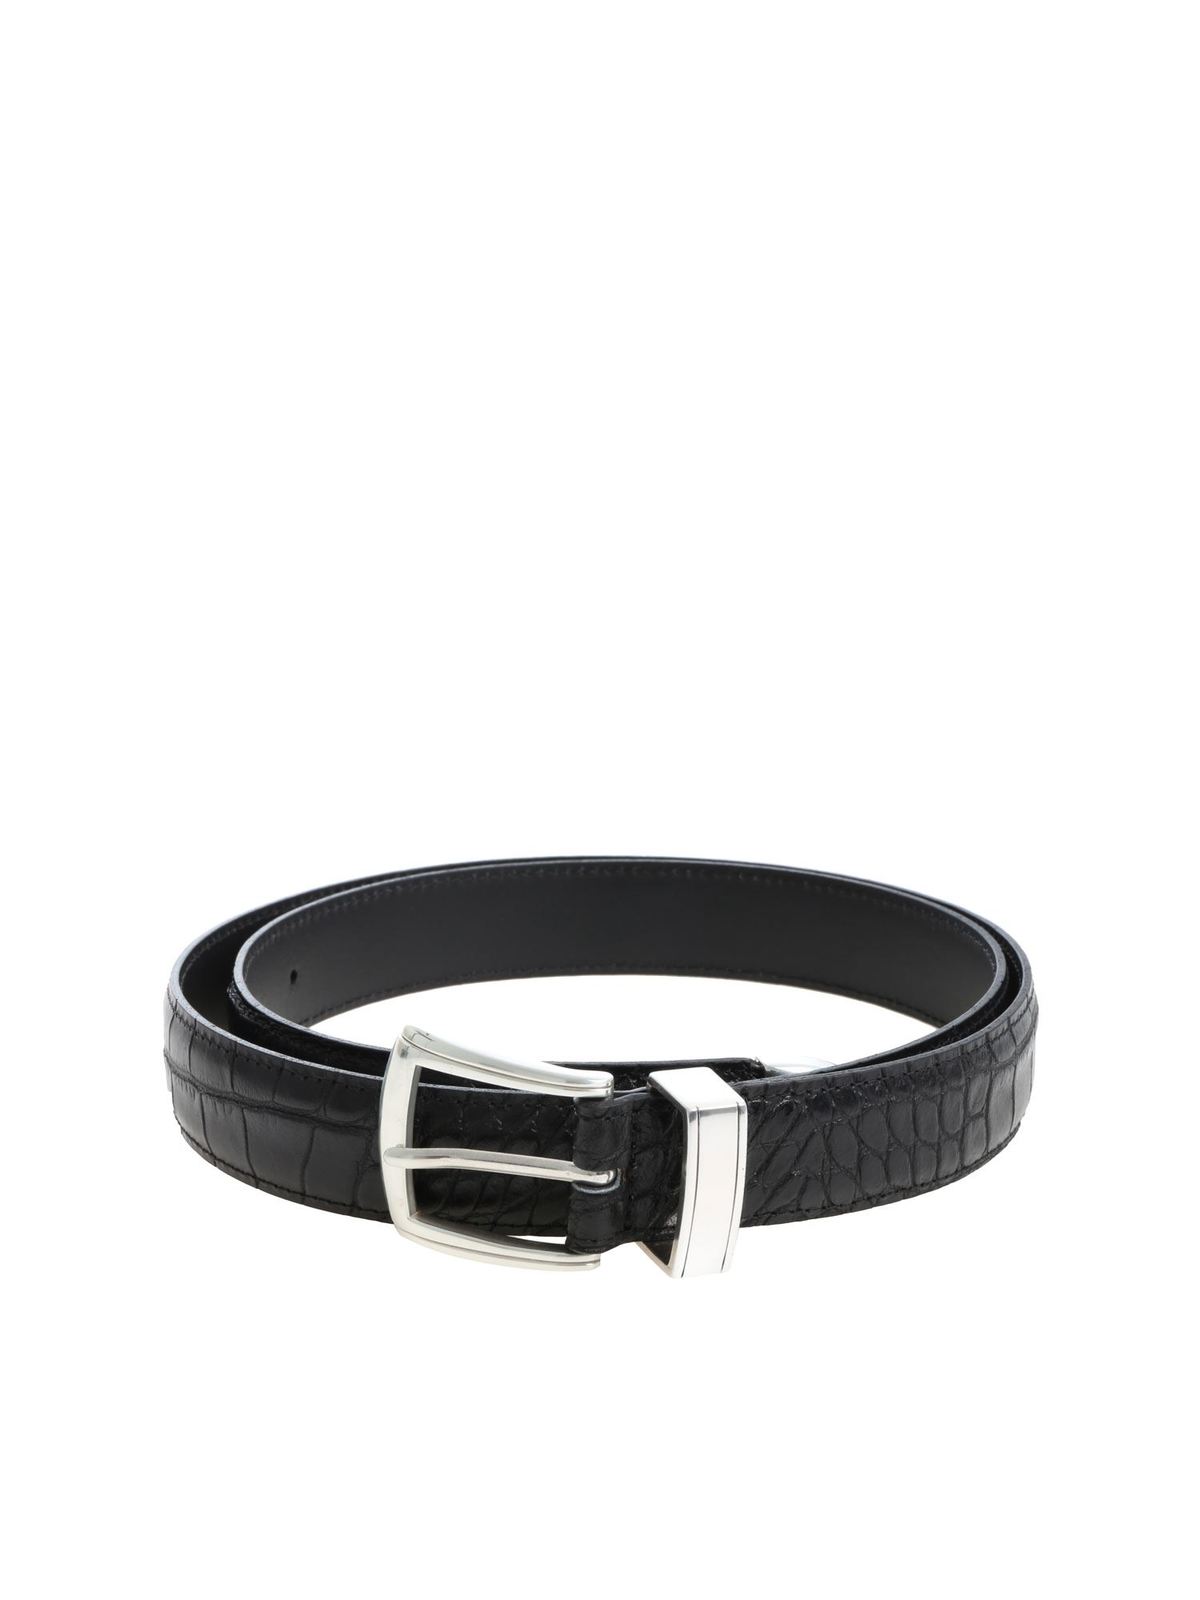 ANDREA D'AMICO COCO-EFFECT LEATHER BLACK BELT